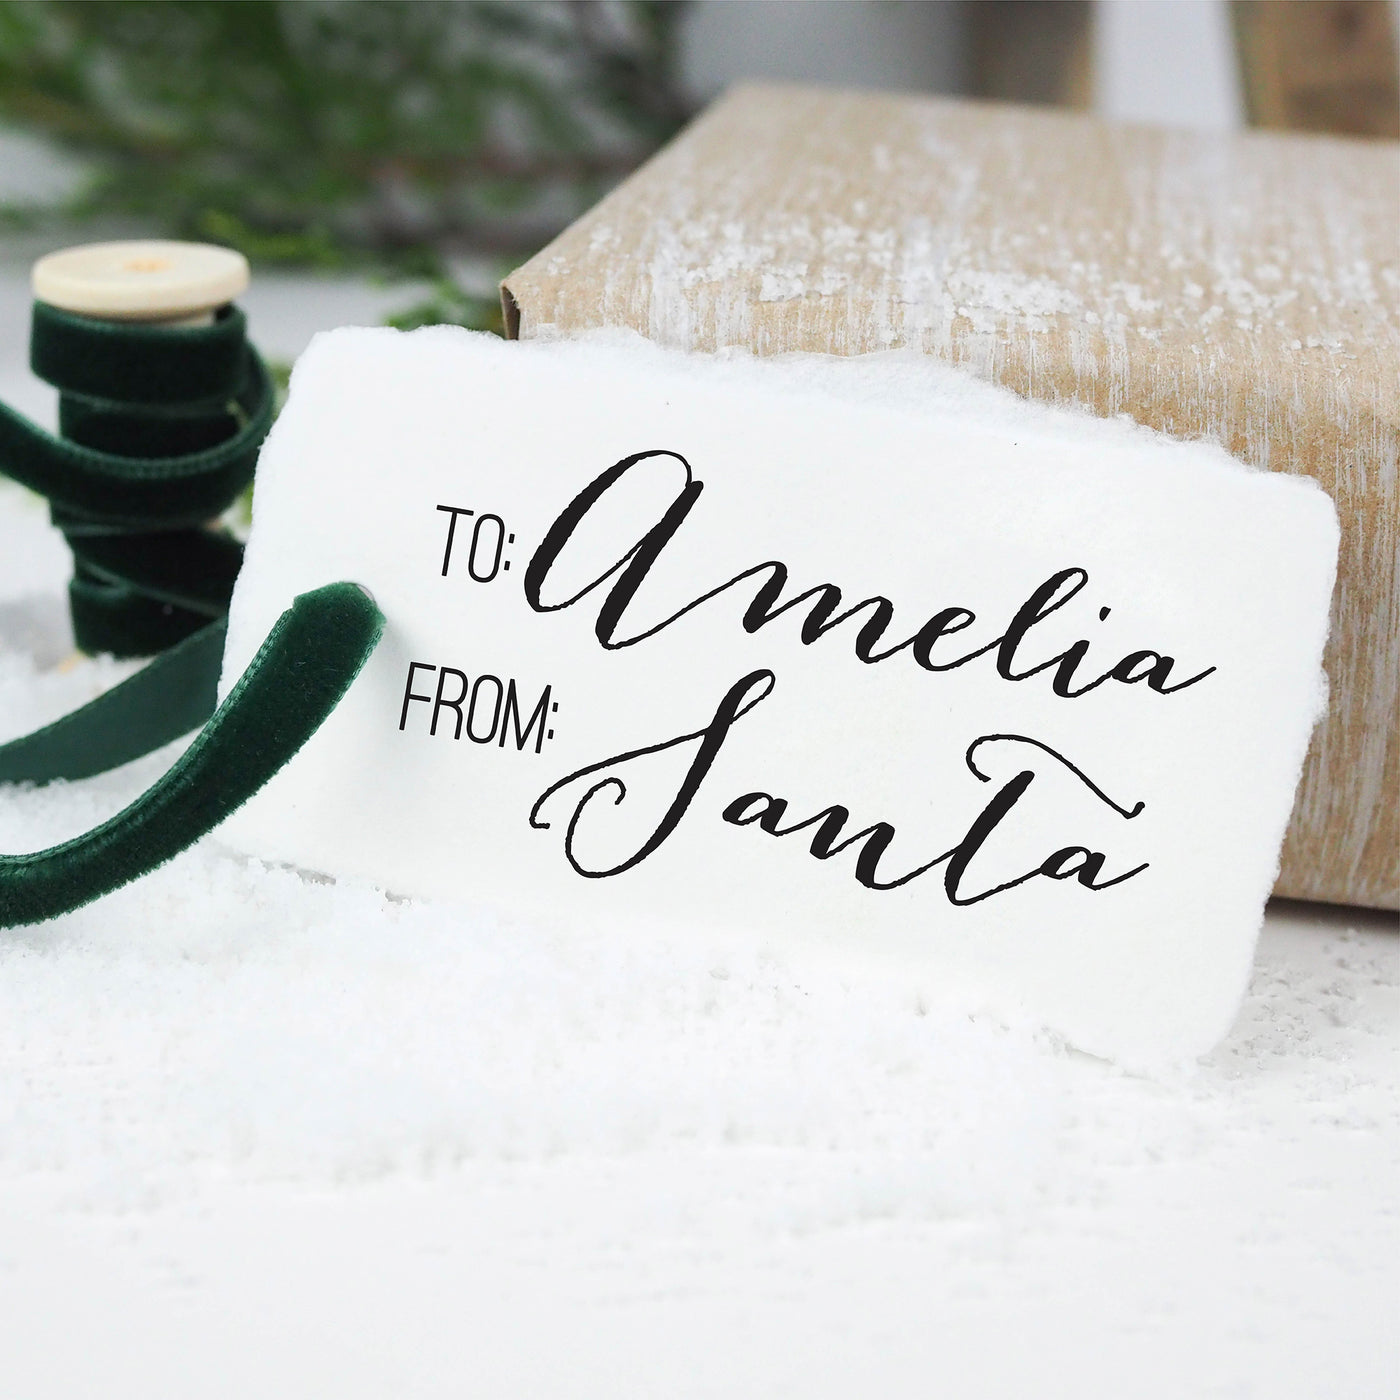 'FROM SANTA' RUBBER STAMP